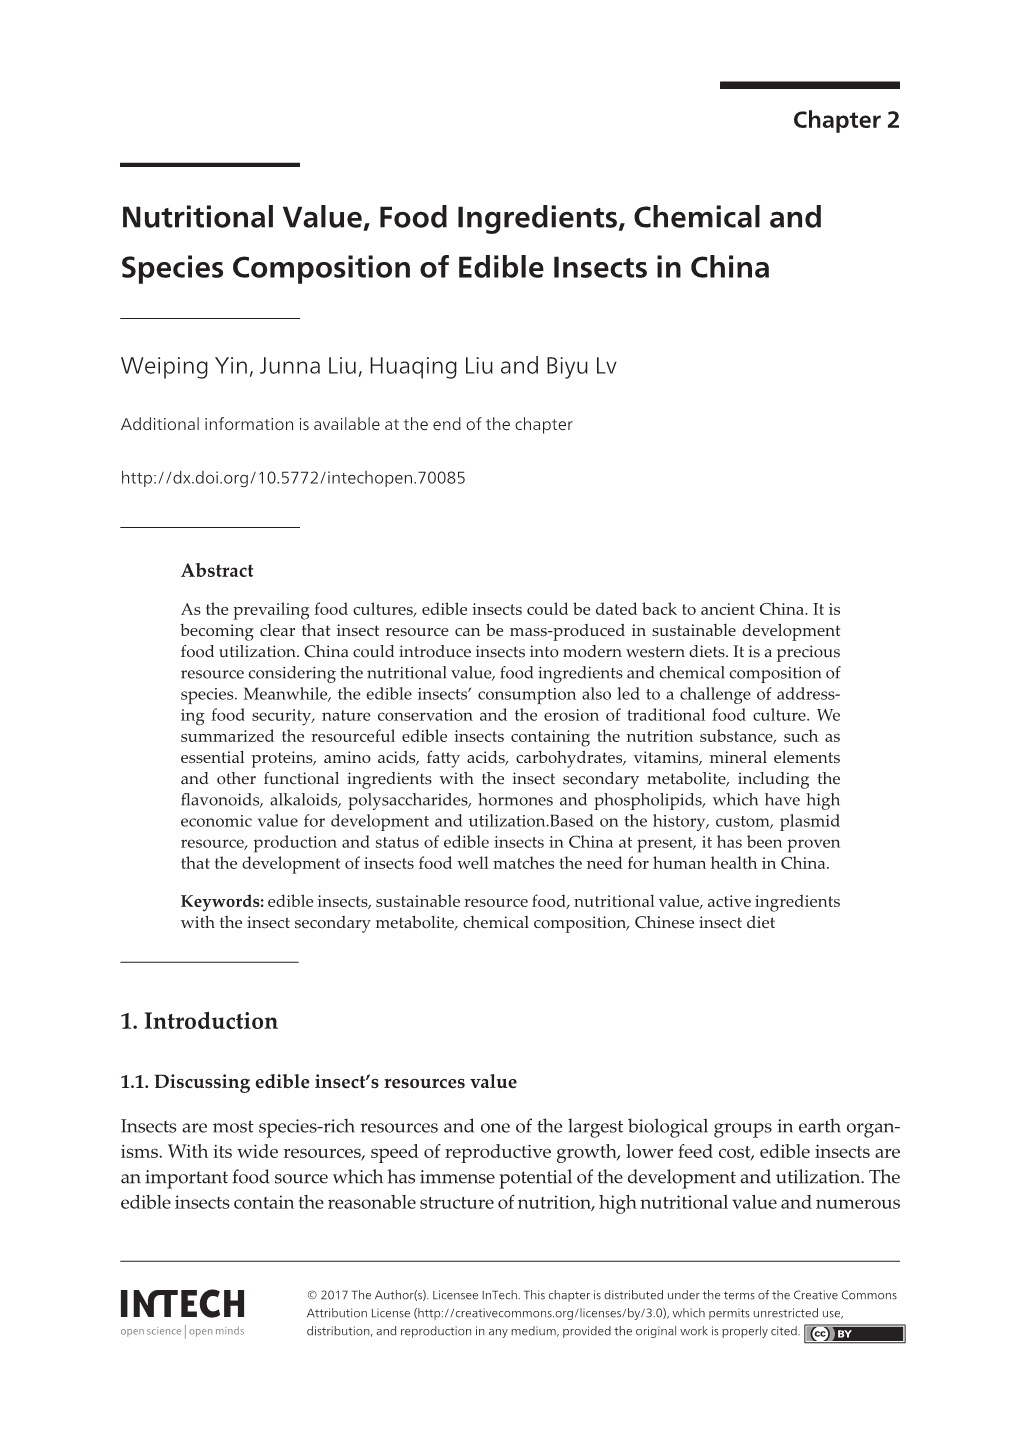 Nutritional Value, Food Ingredients, Chemical and Species Composition of Edible Insects in China 29